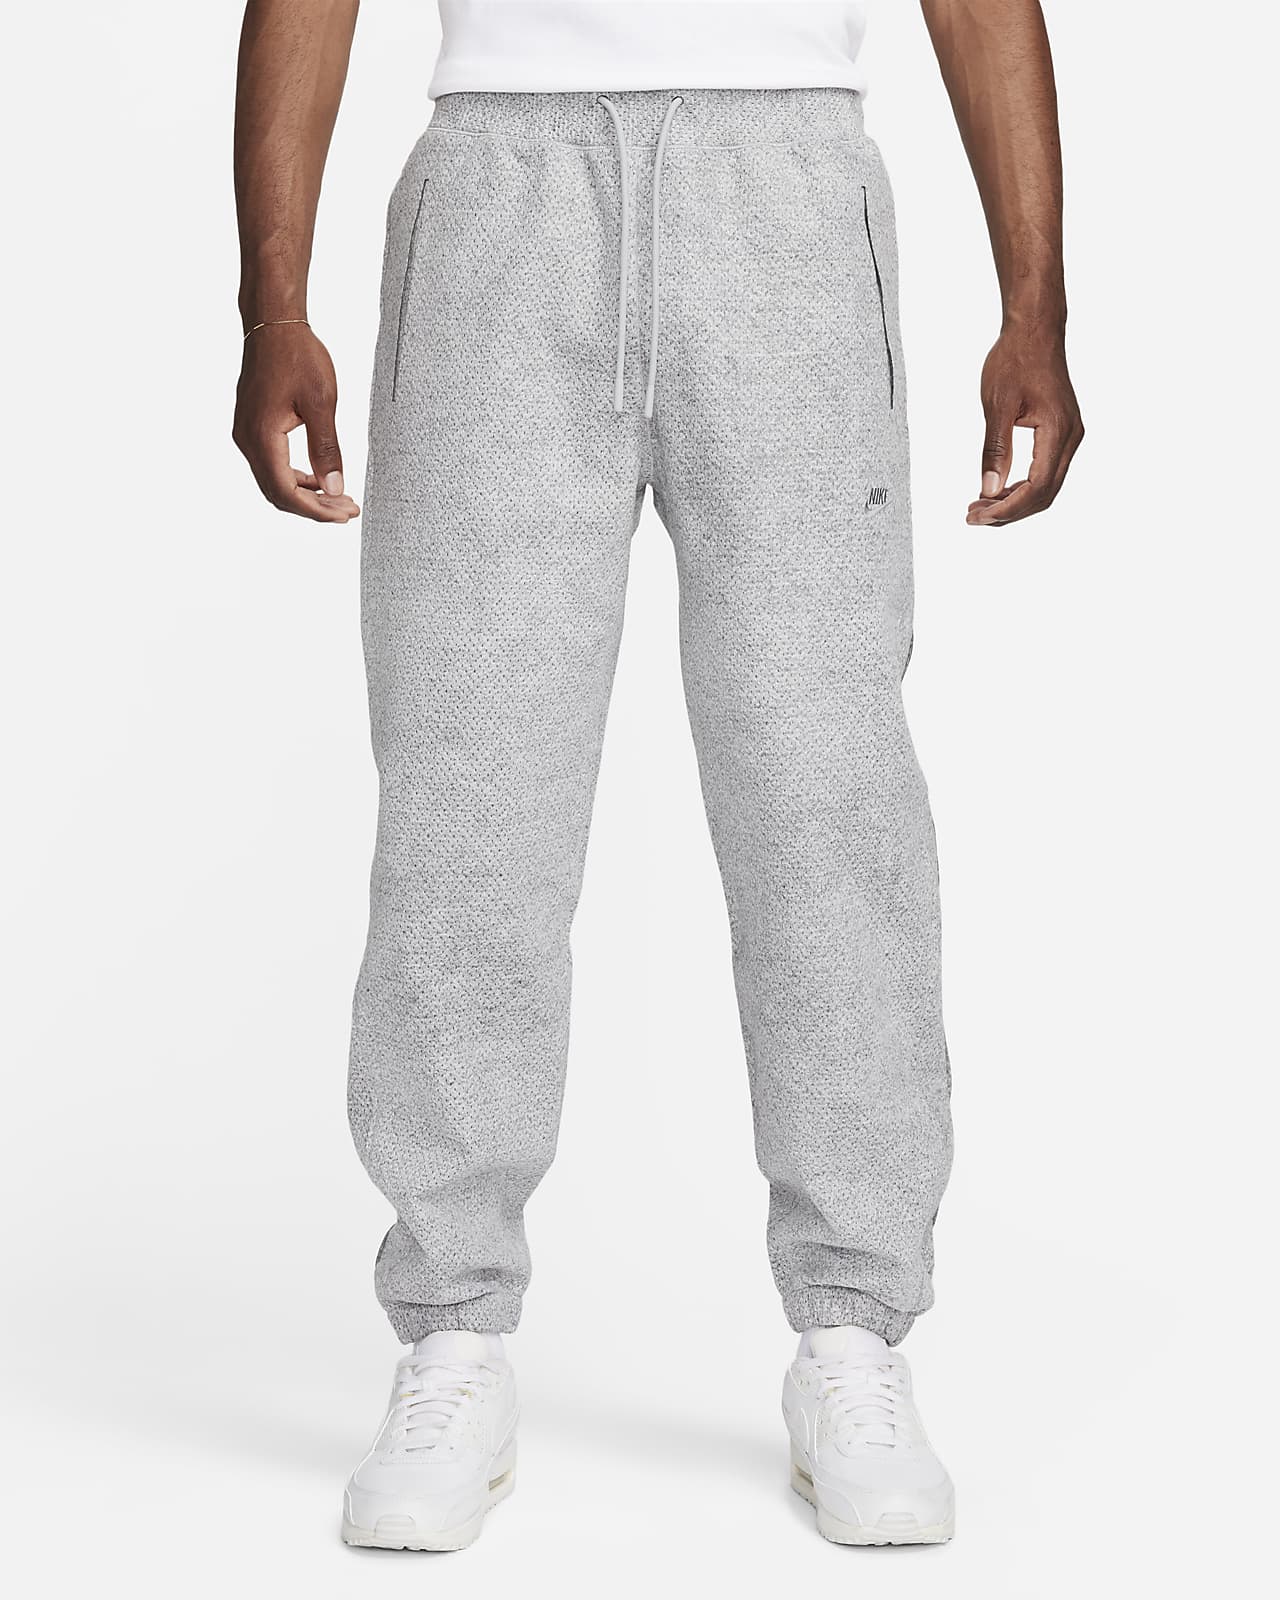 https://static.nike.com/a/images/t_PDP_1280_v1/f_auto,q_auto:eco/94008003-3e5a-4773-895a-15b3df554dac/forward-trousers-adv-trousers-G8W1NW.png